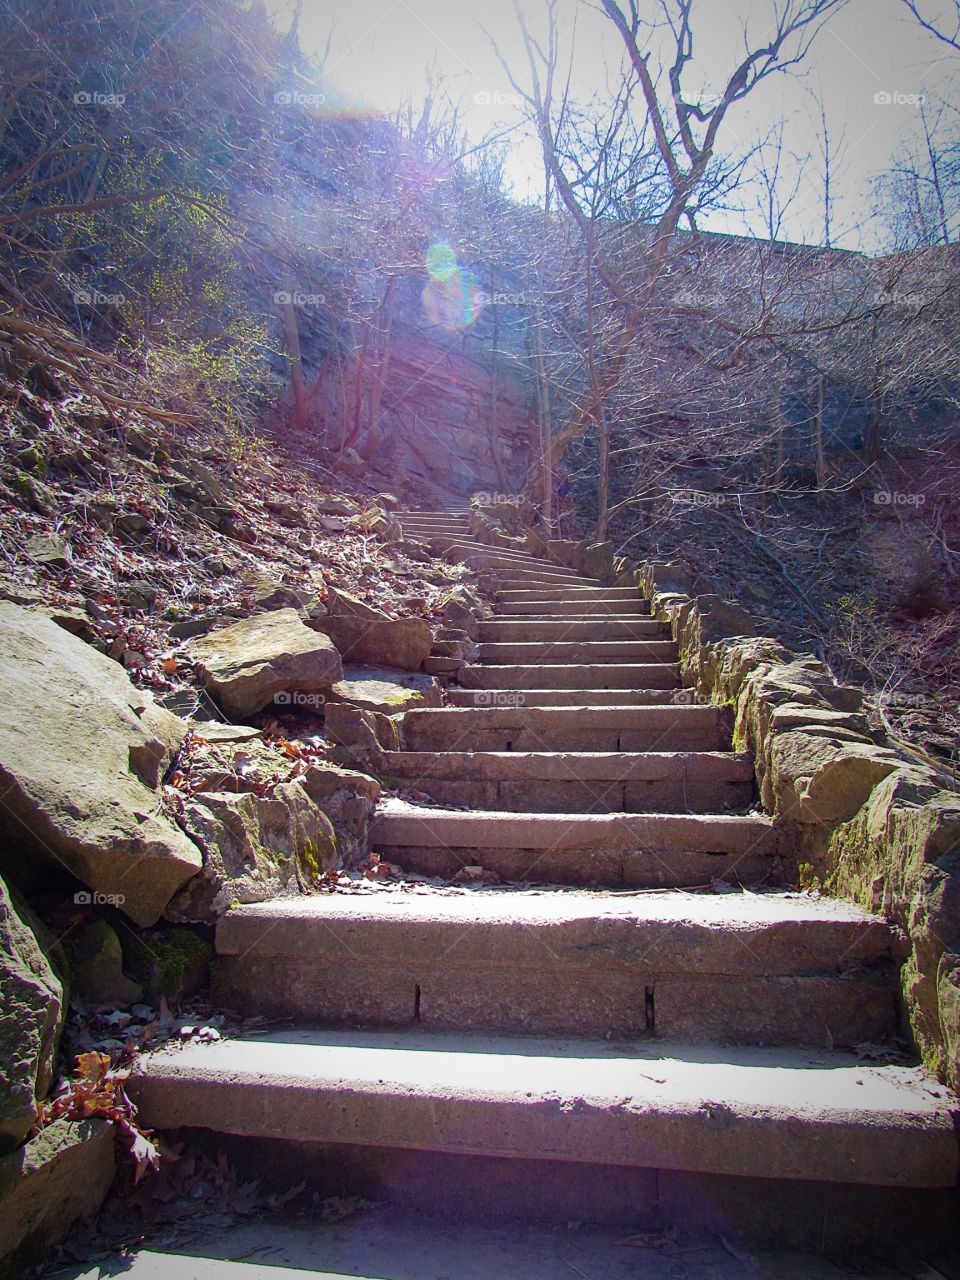 Gorge Staircase